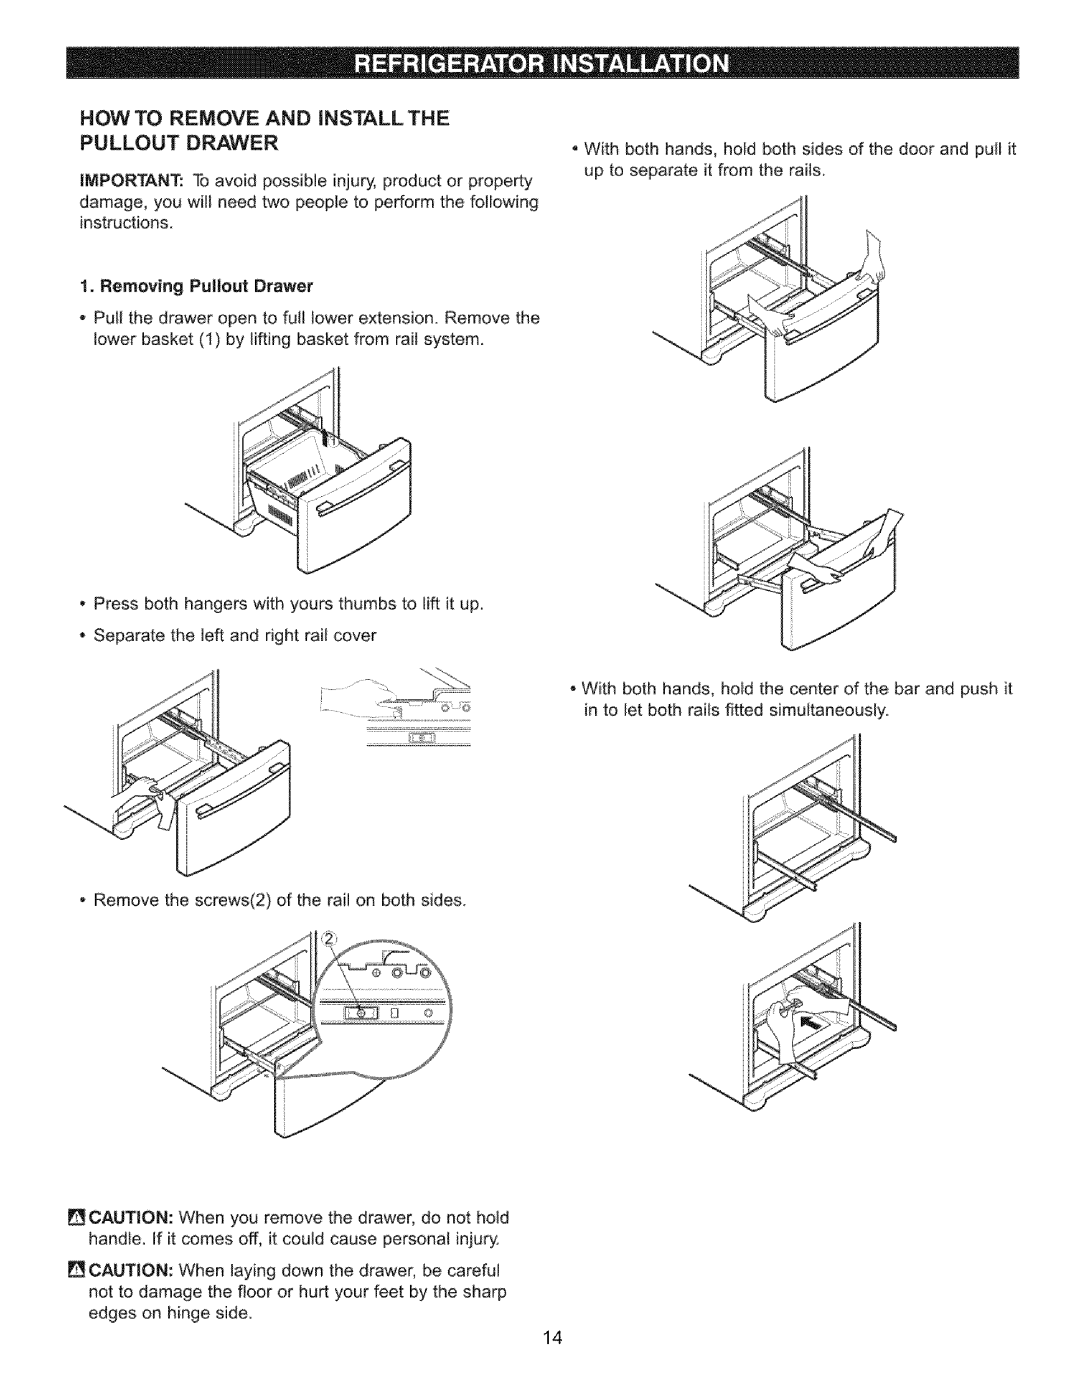 LG Electronics LFC22760 manual How To Remove And Install The Pullout Drawer, Removing Pu|lout Drawer 